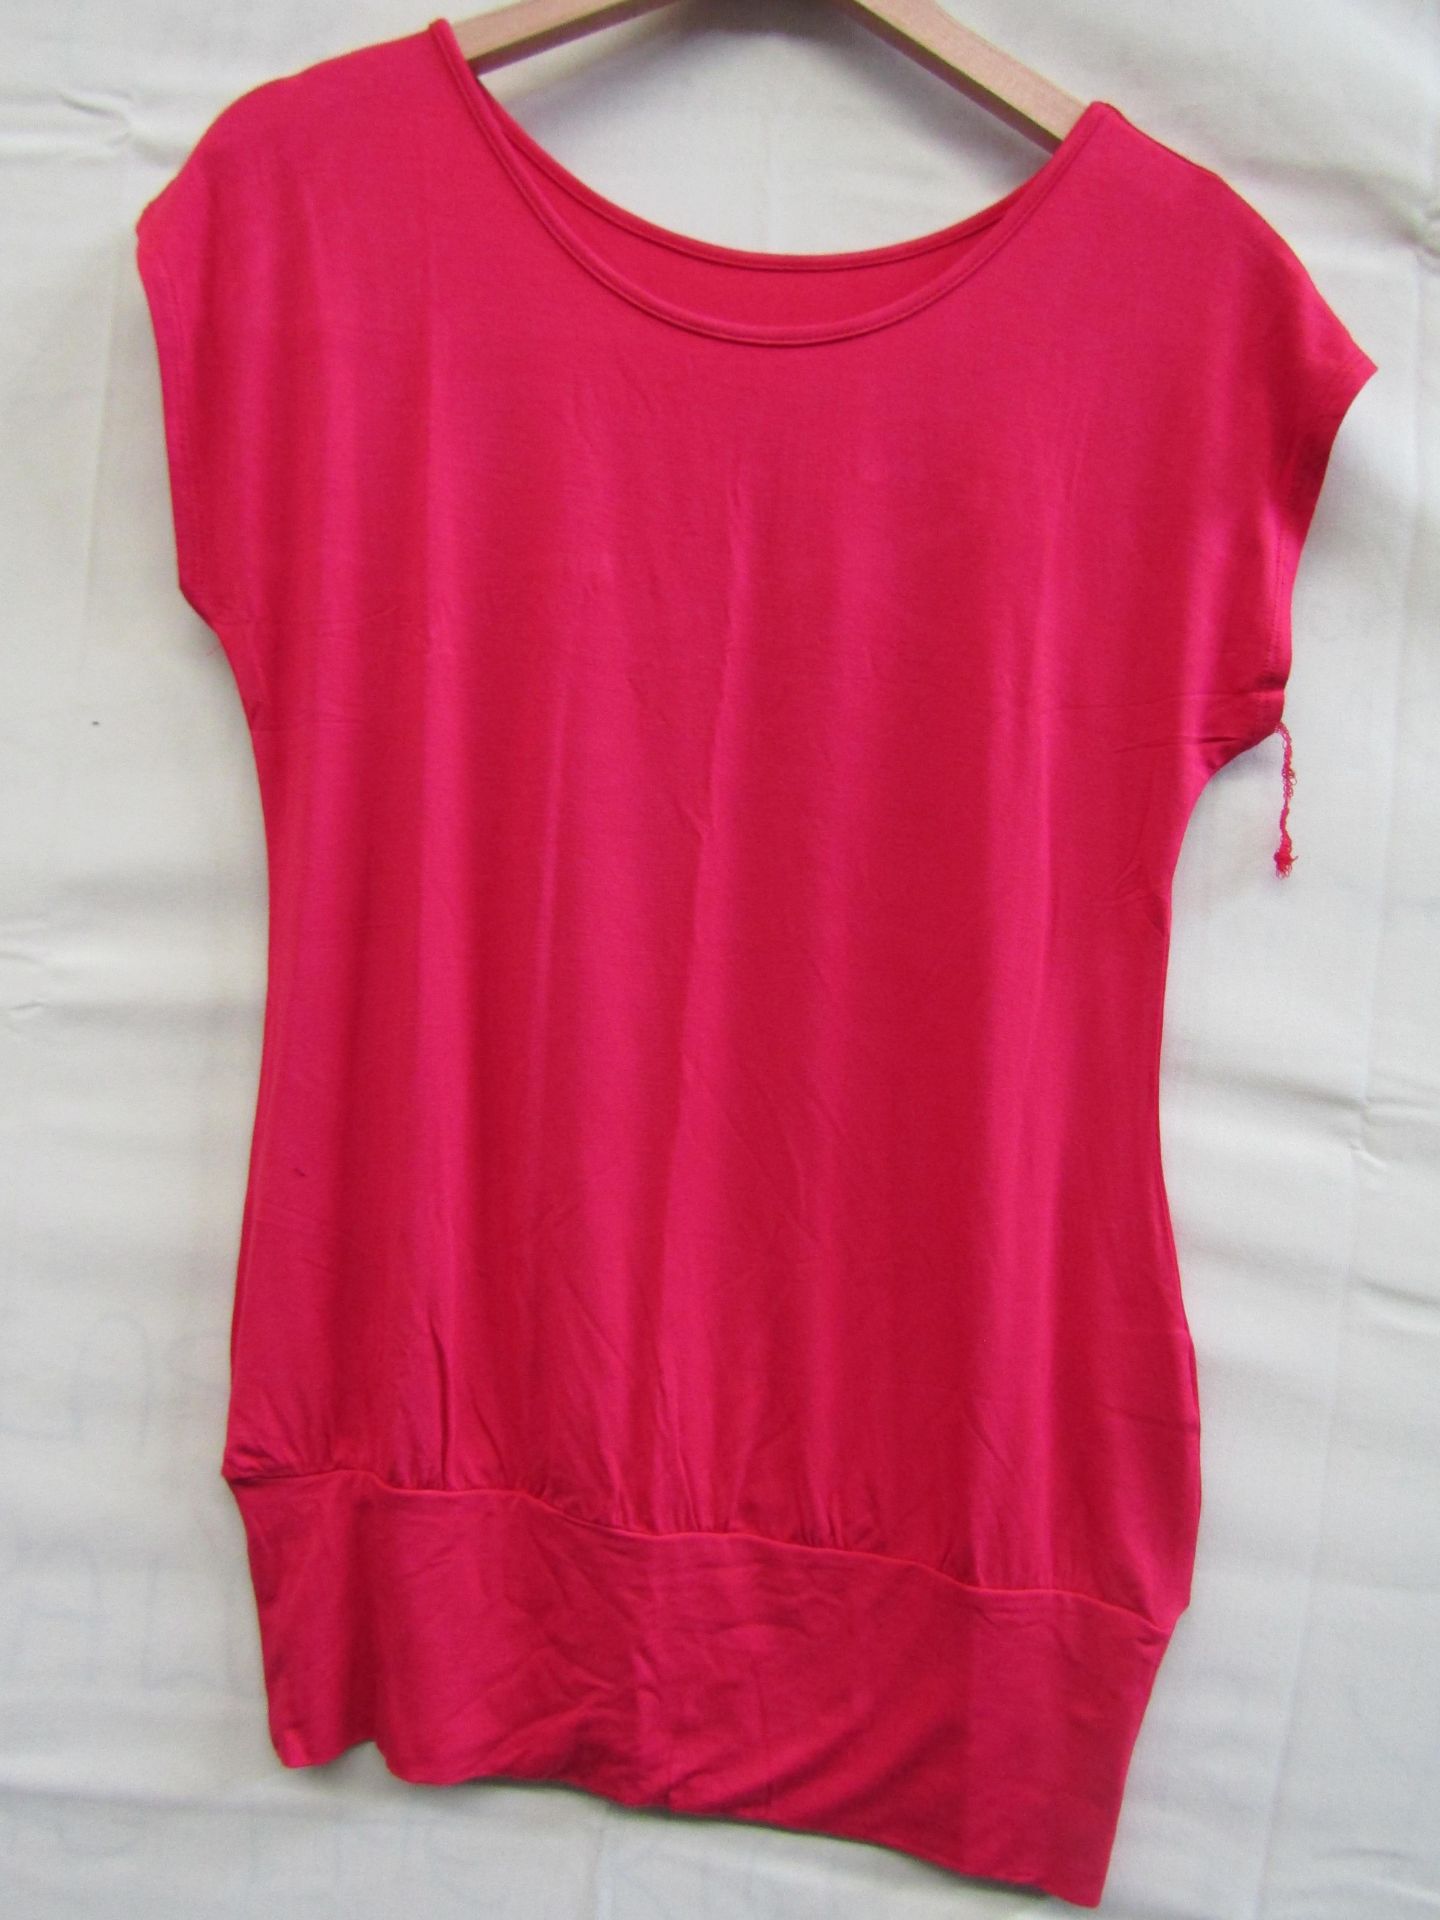 Lascana Pink Top With Waistband Size 10/12 Looks Unworn No Tags